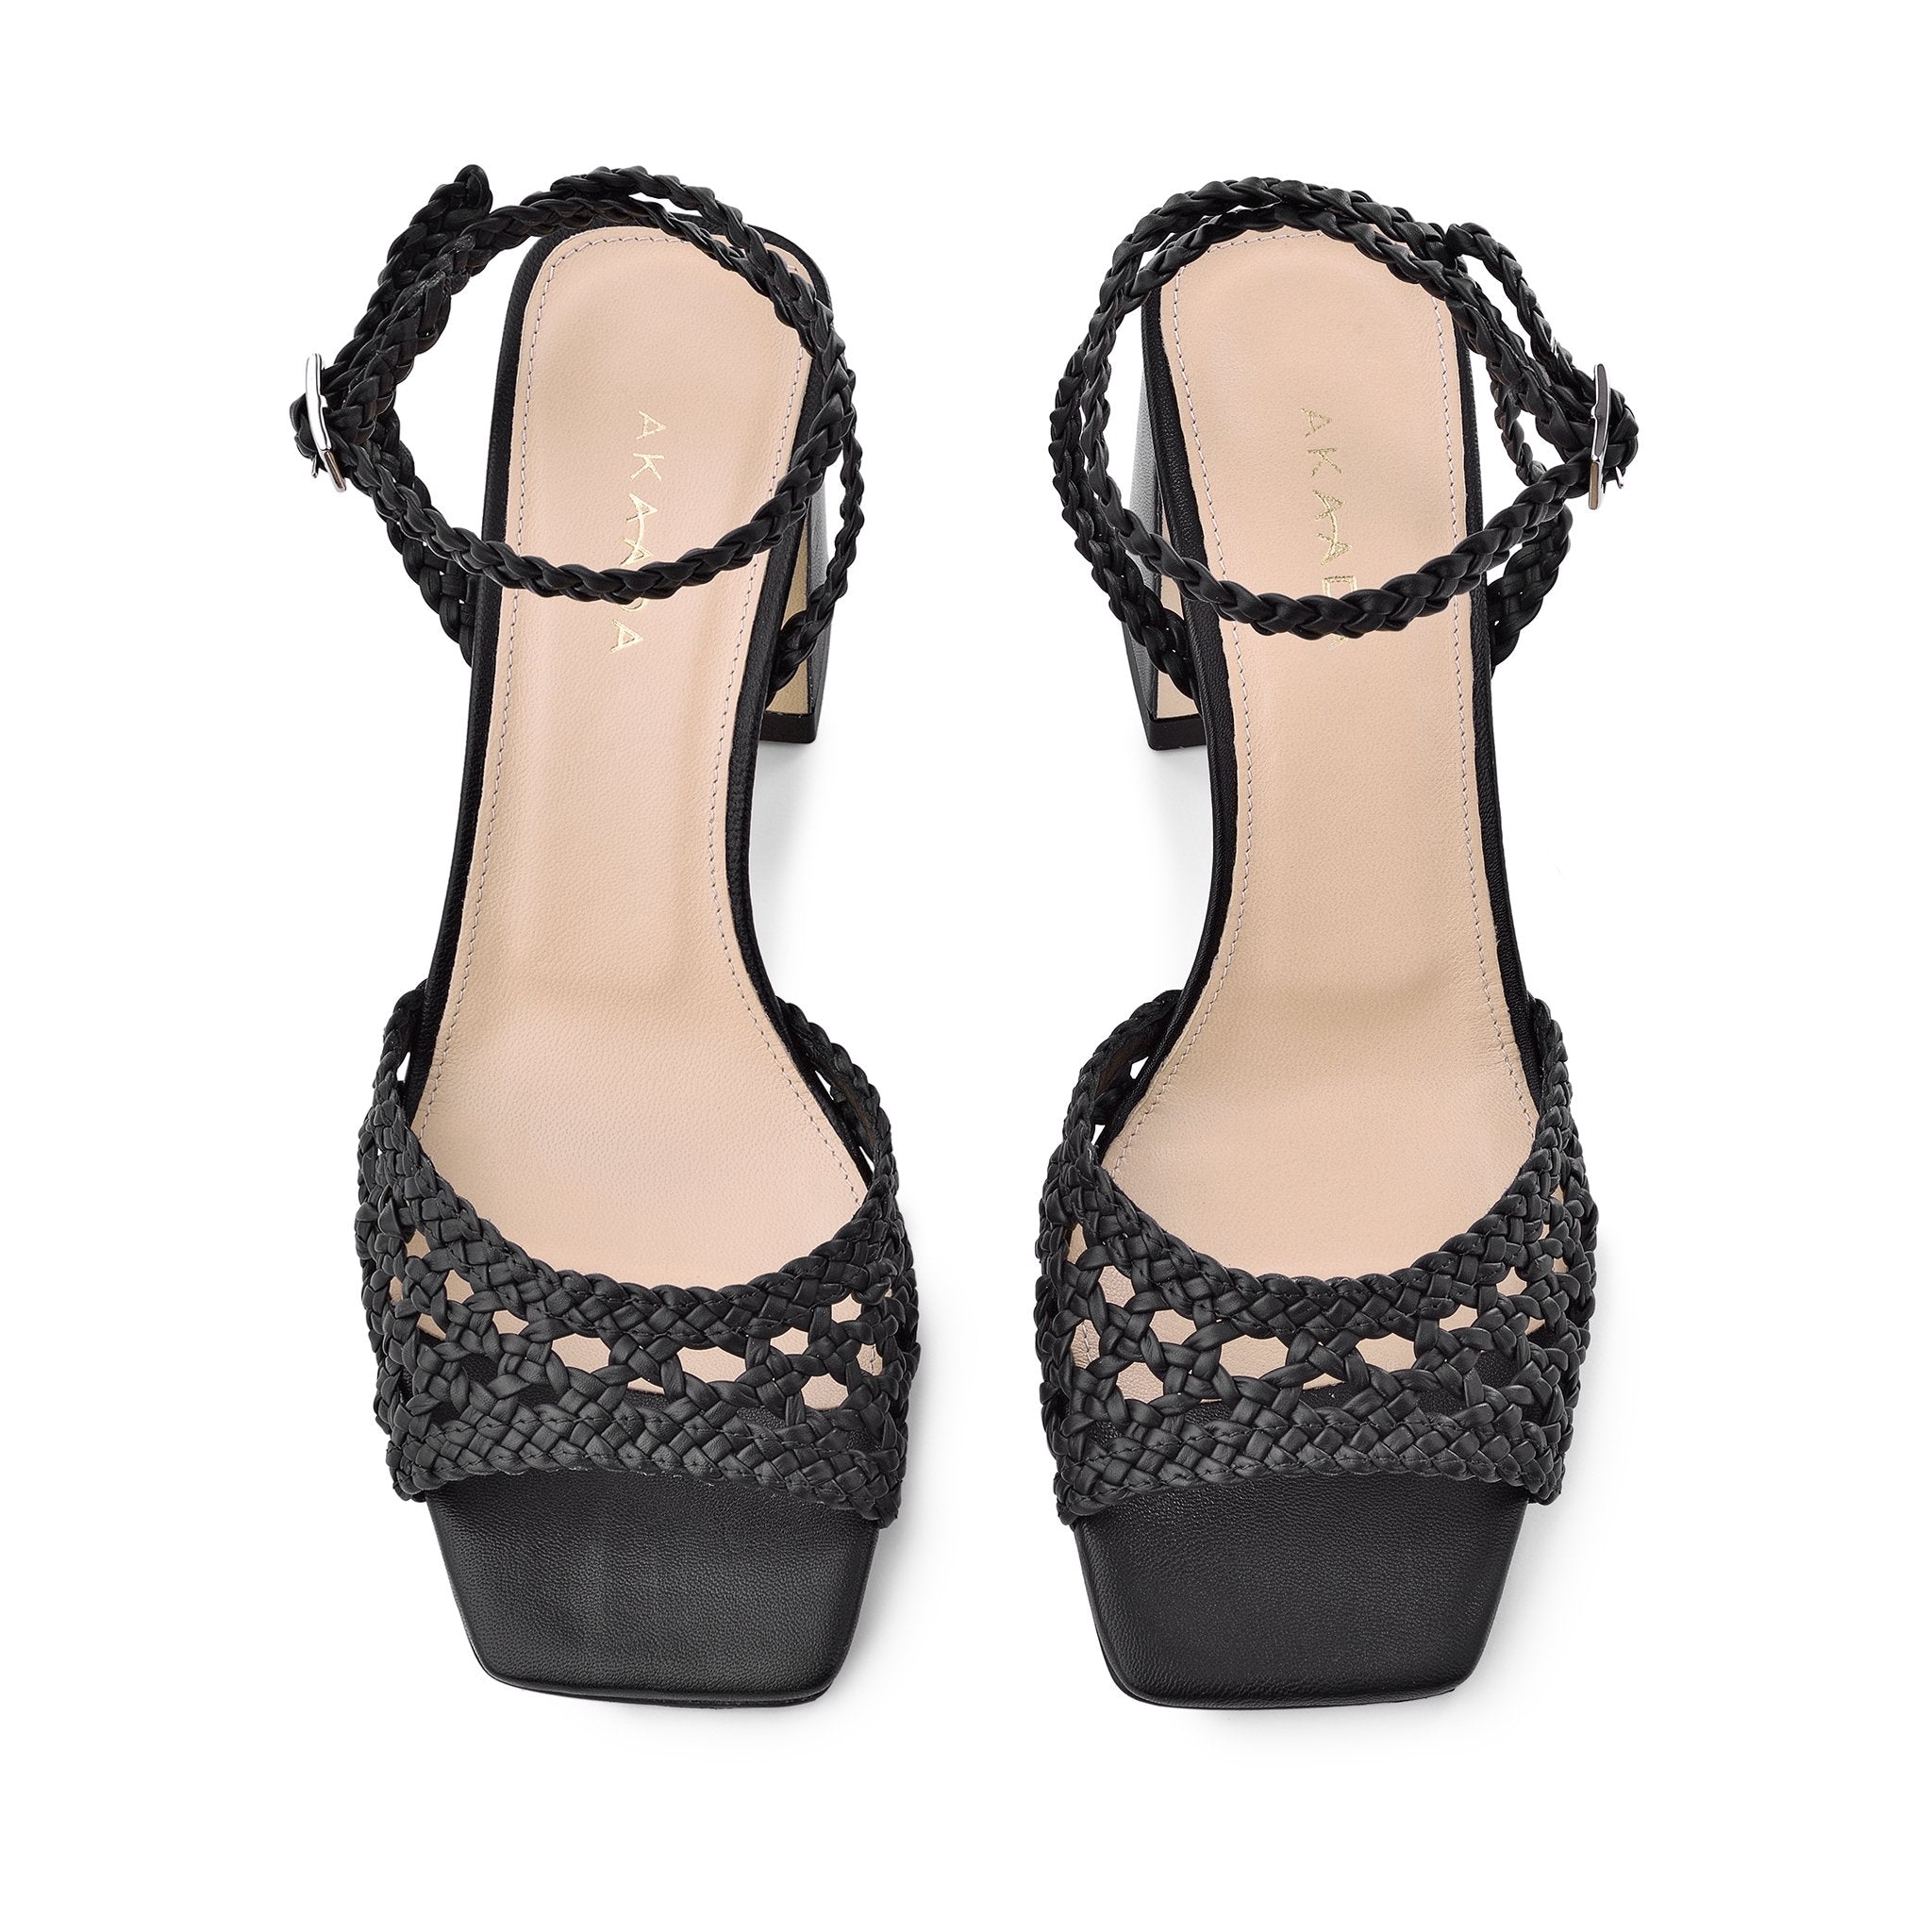 Tama Black Woven Leather Sandals 1418-02 - 8